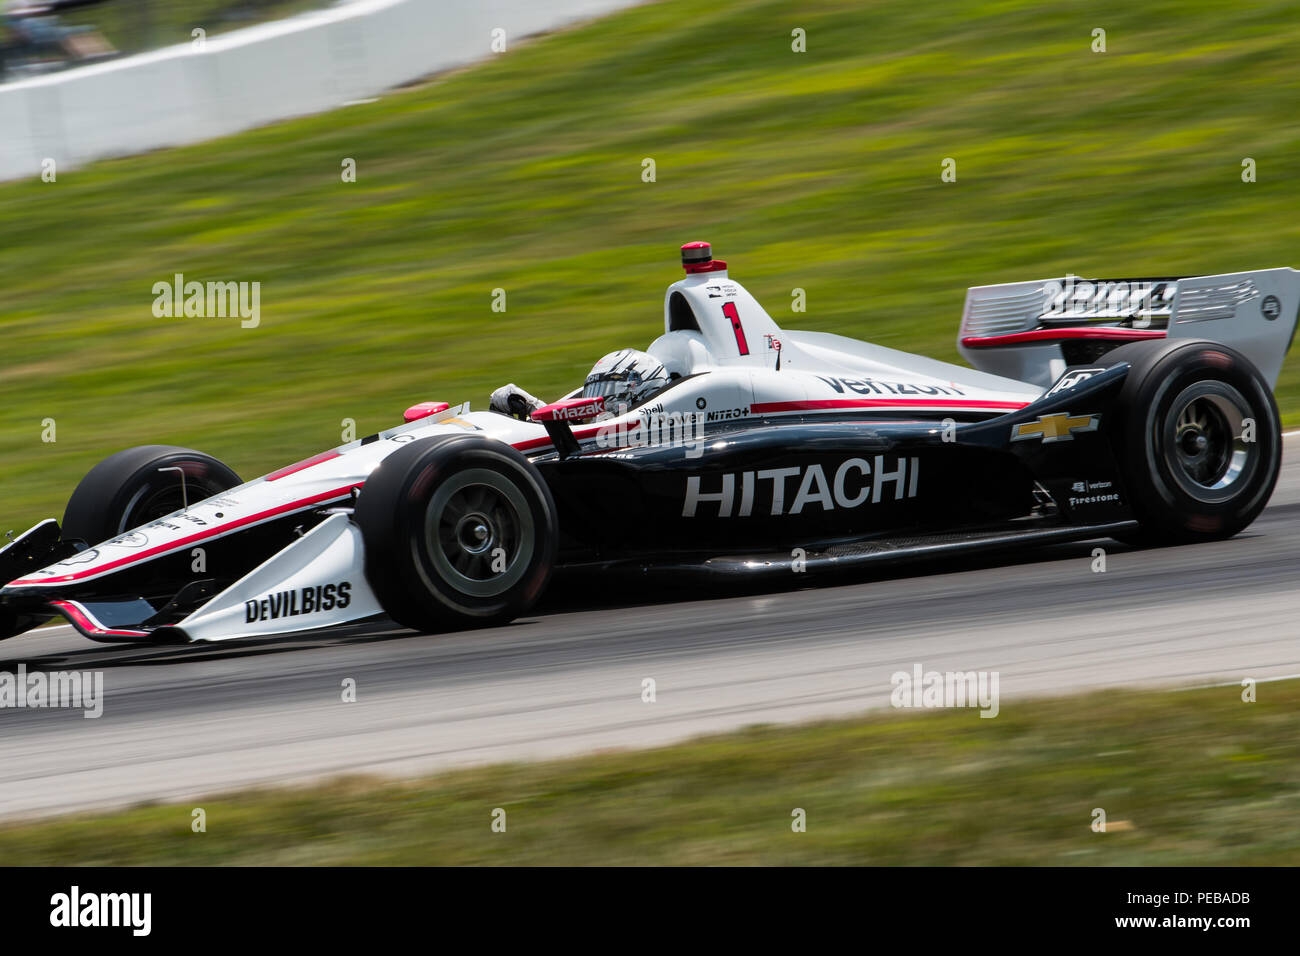 Lexington, Ohio, USA. 29th July, 2018. Josef Newgarden exiting turn 6 at the pivotal Honda IndyCar 200 at Mid-Ohio, July 29, 2018, as the points race heats up for the 13th race of the season. Credit: Eddie Hurskin/ZUMA Wire/Alamy Live News Stock Photo